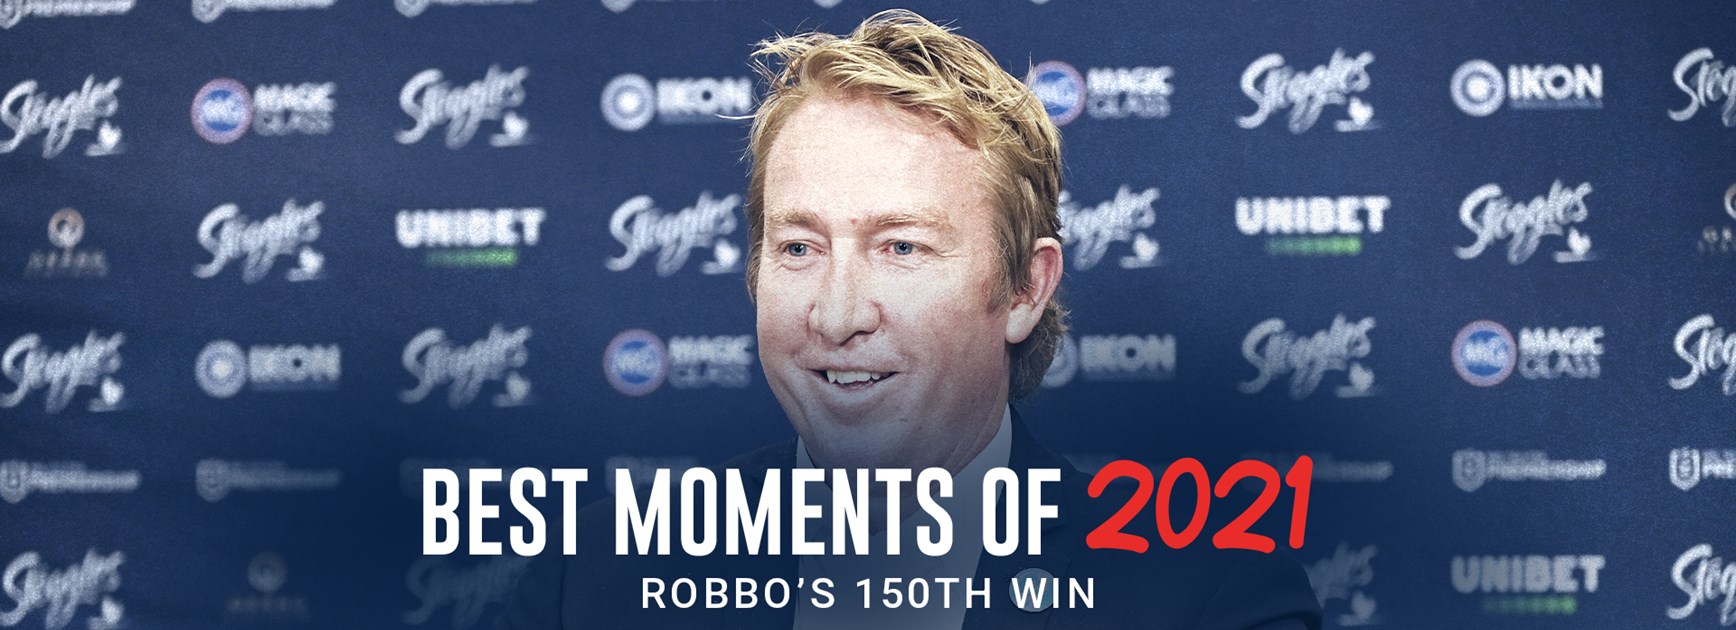 Best Moments of 2021: Robbo's 150th Win